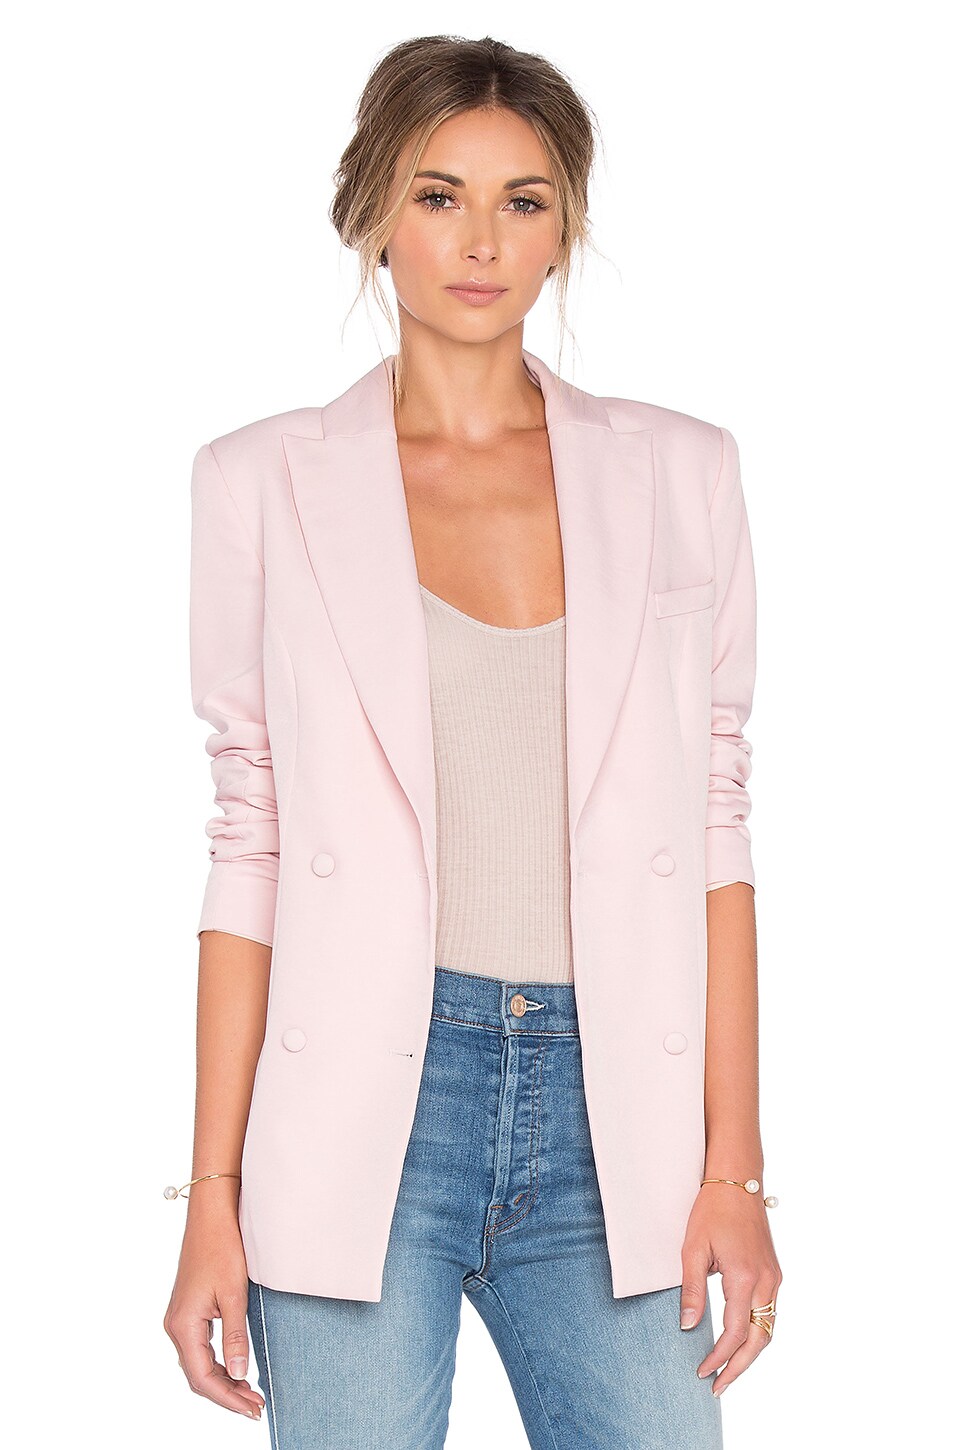 TY-LR The Divergence Tuxedo Jacket in Pastel Pink | REVOLVE